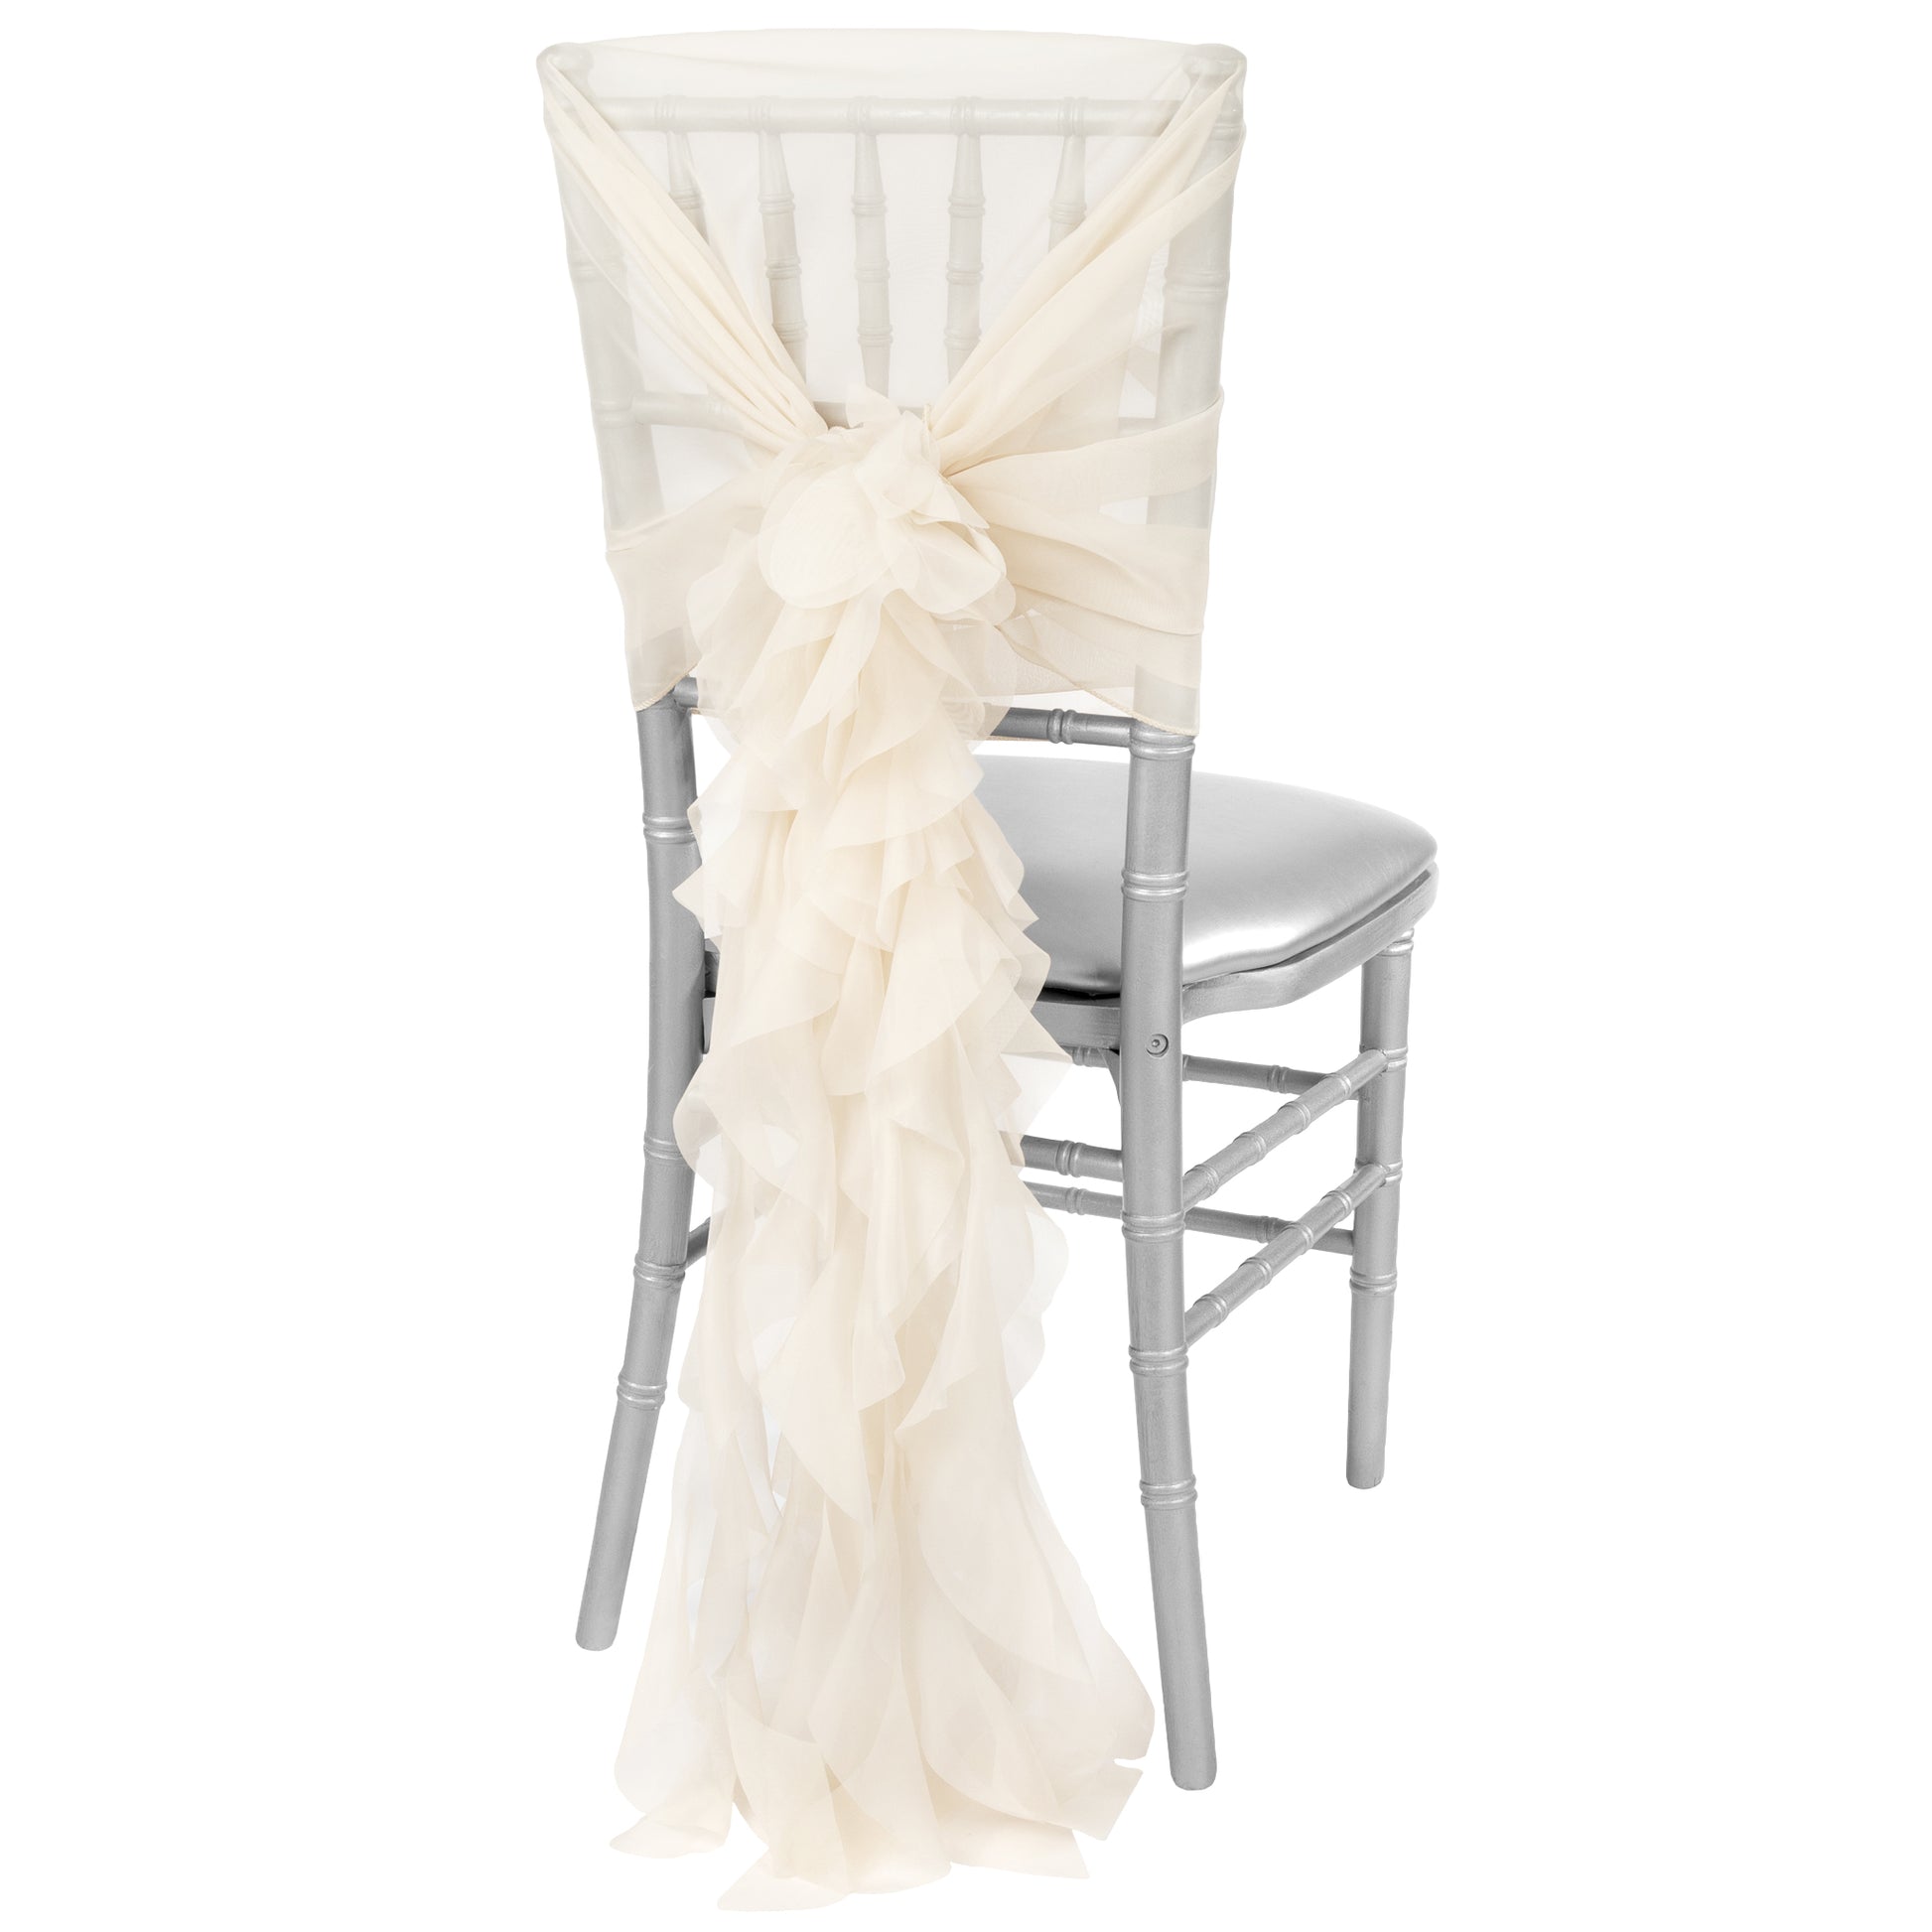 1 Set of Soft Curly Willow Ruffles Chair Sash & Cap - Ivory - CV Linens